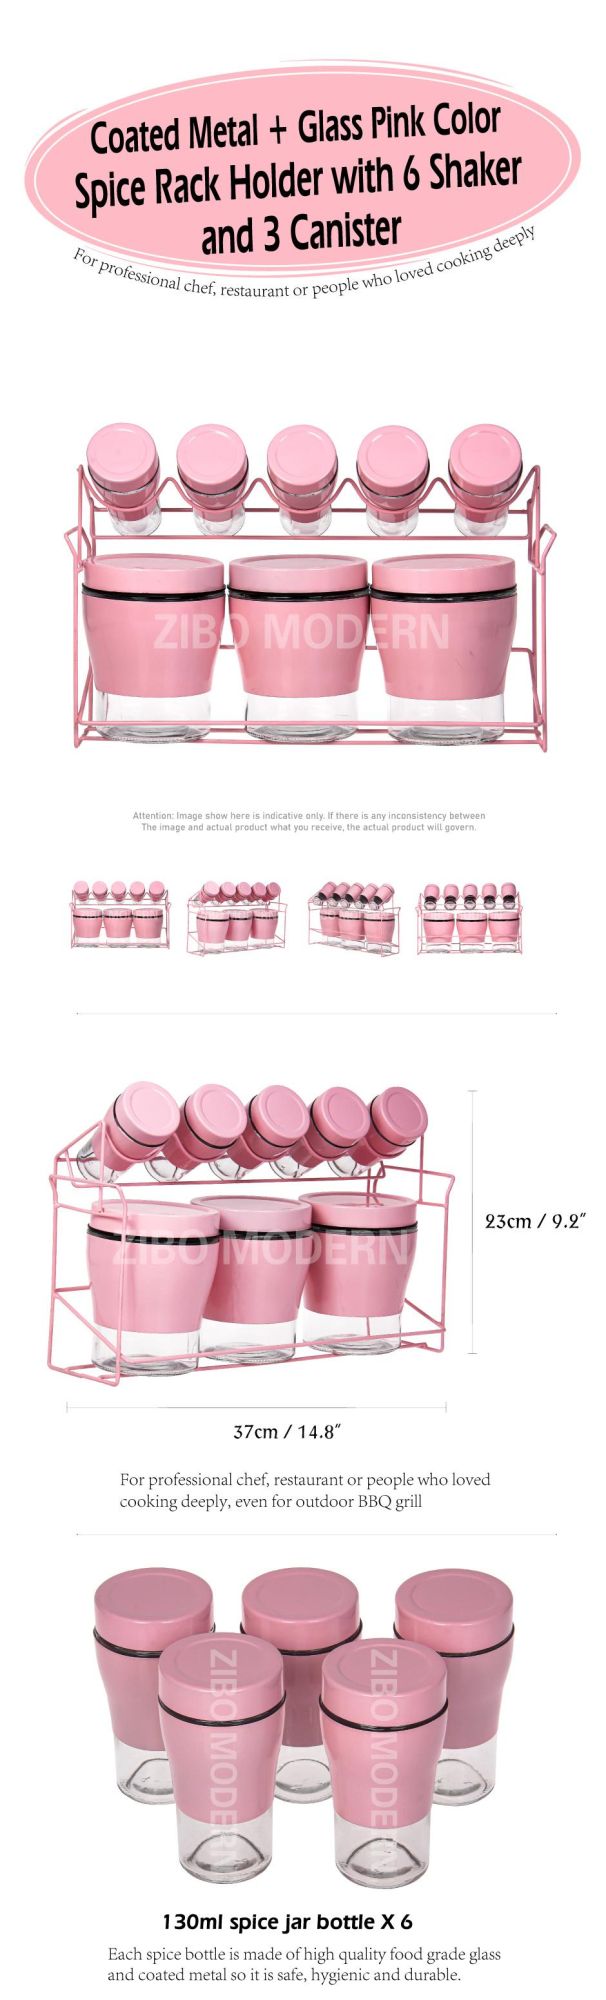 Coated Metal + Glass Pink Color Spice Rack Holder with 6 Shaker and 3 Canister - Spice Storage Rack